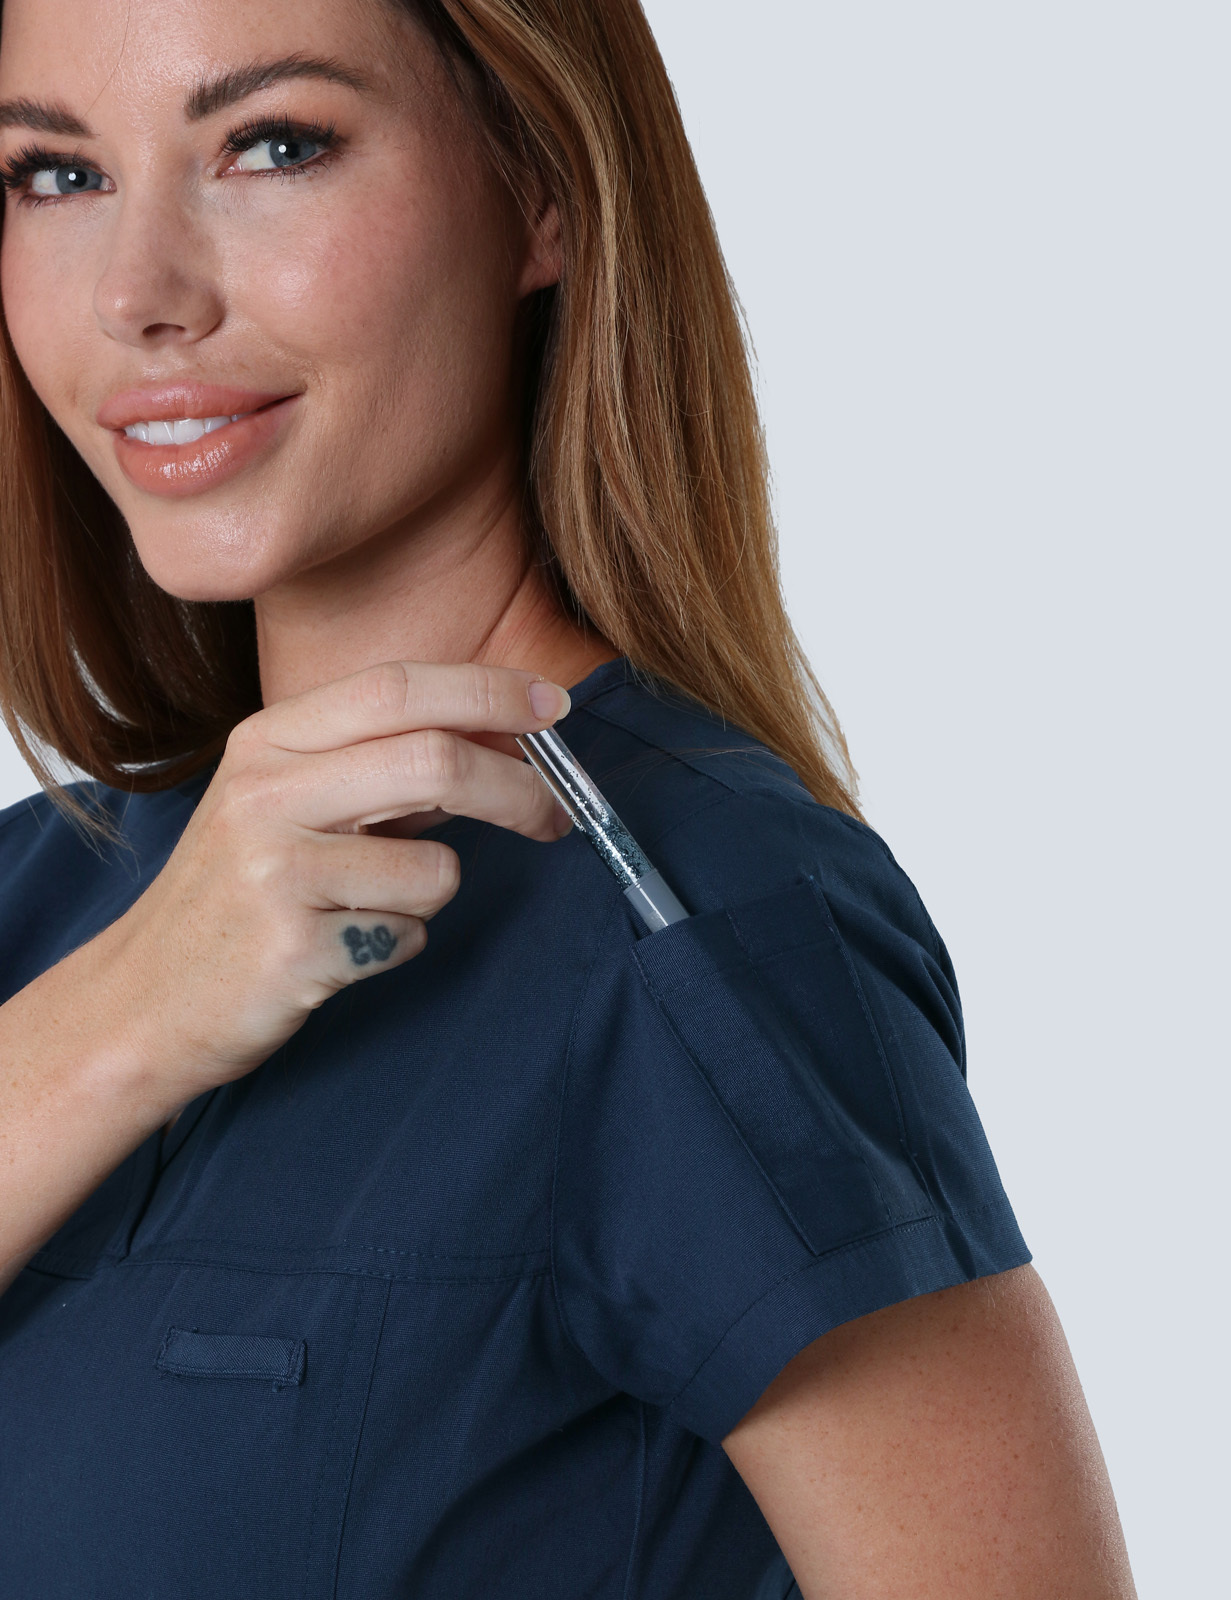 Darling Downs - Renal Unit (Women's Fit Solid Scrub Top and Cargo Pants in Navy incl Logos)